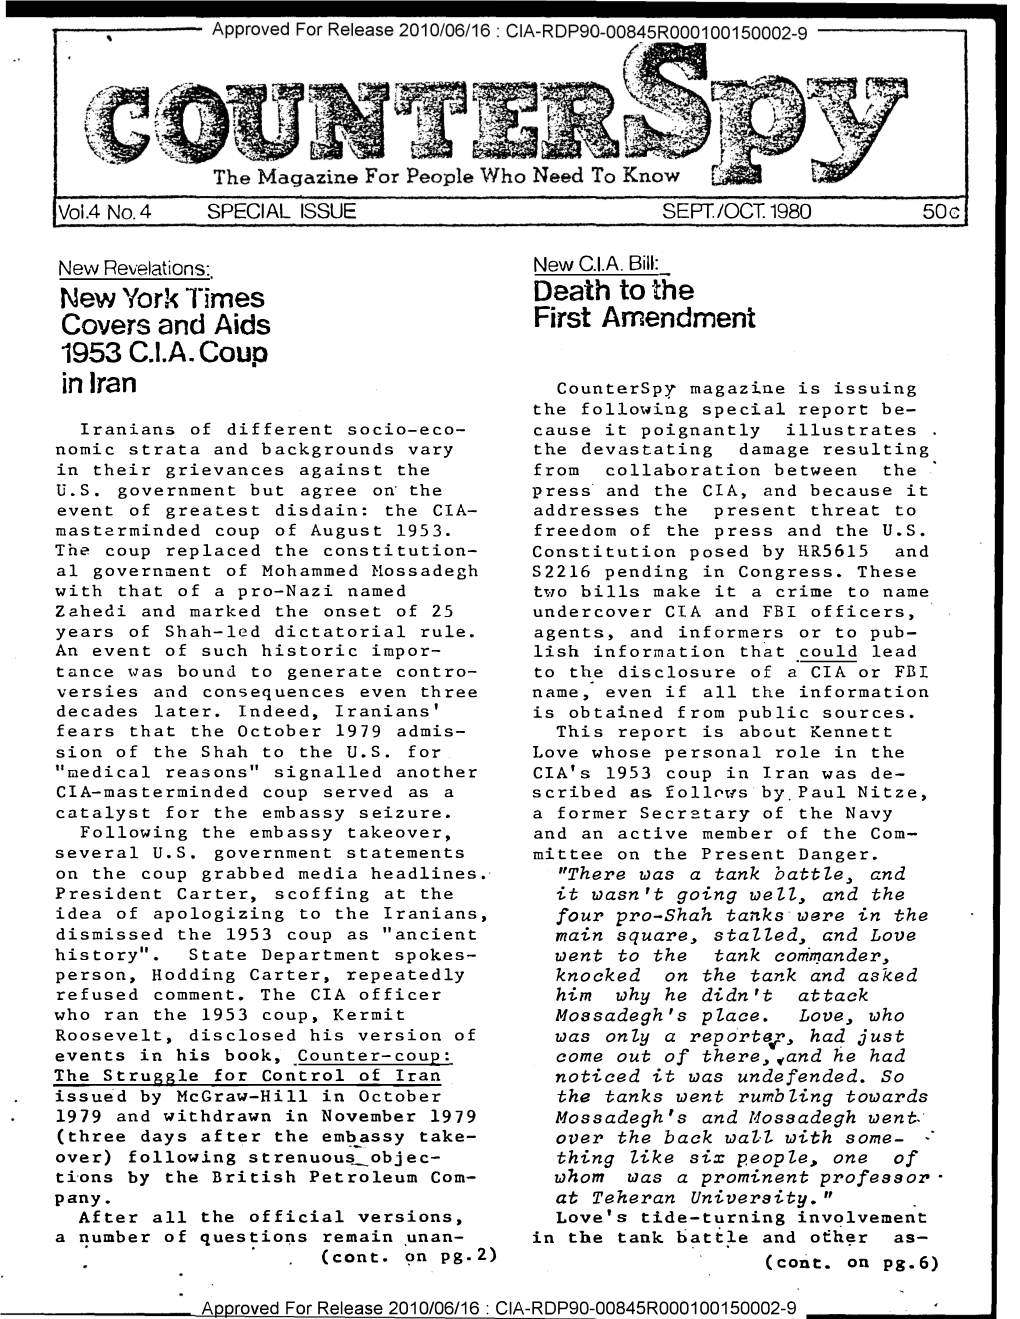 New York Times Covers and Aids 1983 Cia Coup in Iran